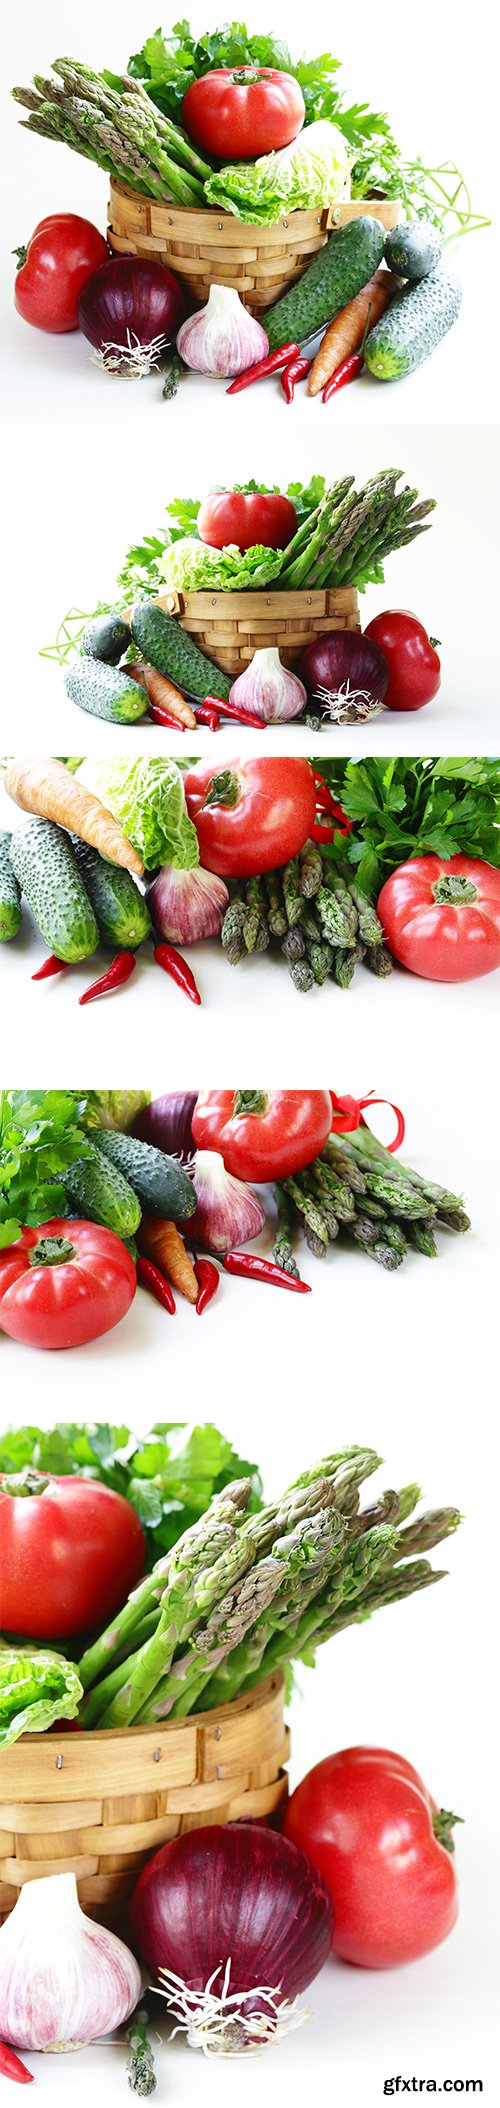 Various Spring Vegetables Isolated - 9xJPGs